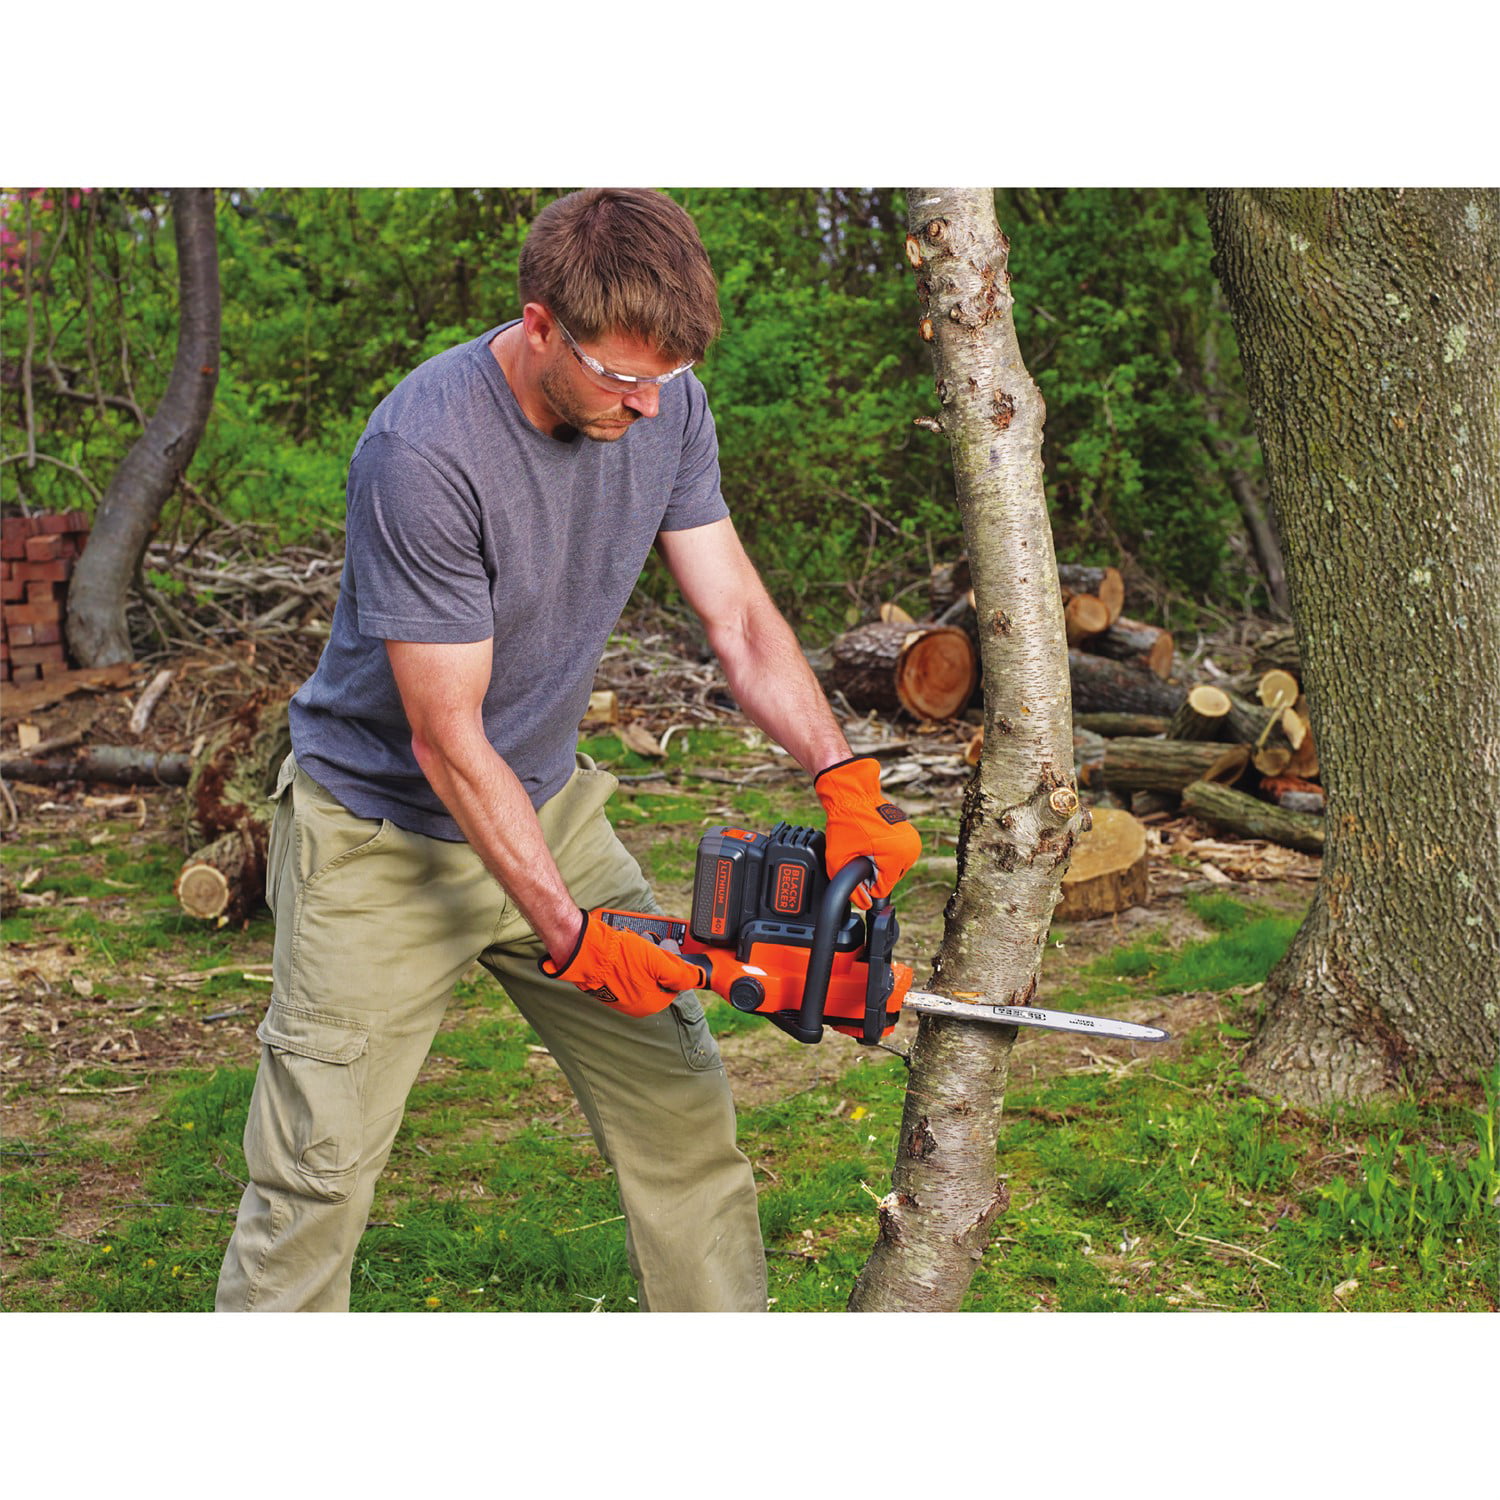 Black & Decker LCS1020B 20V MAX Brushed Lithium-Ion 10 in. Cordless Chainsaw  (Tool Only)